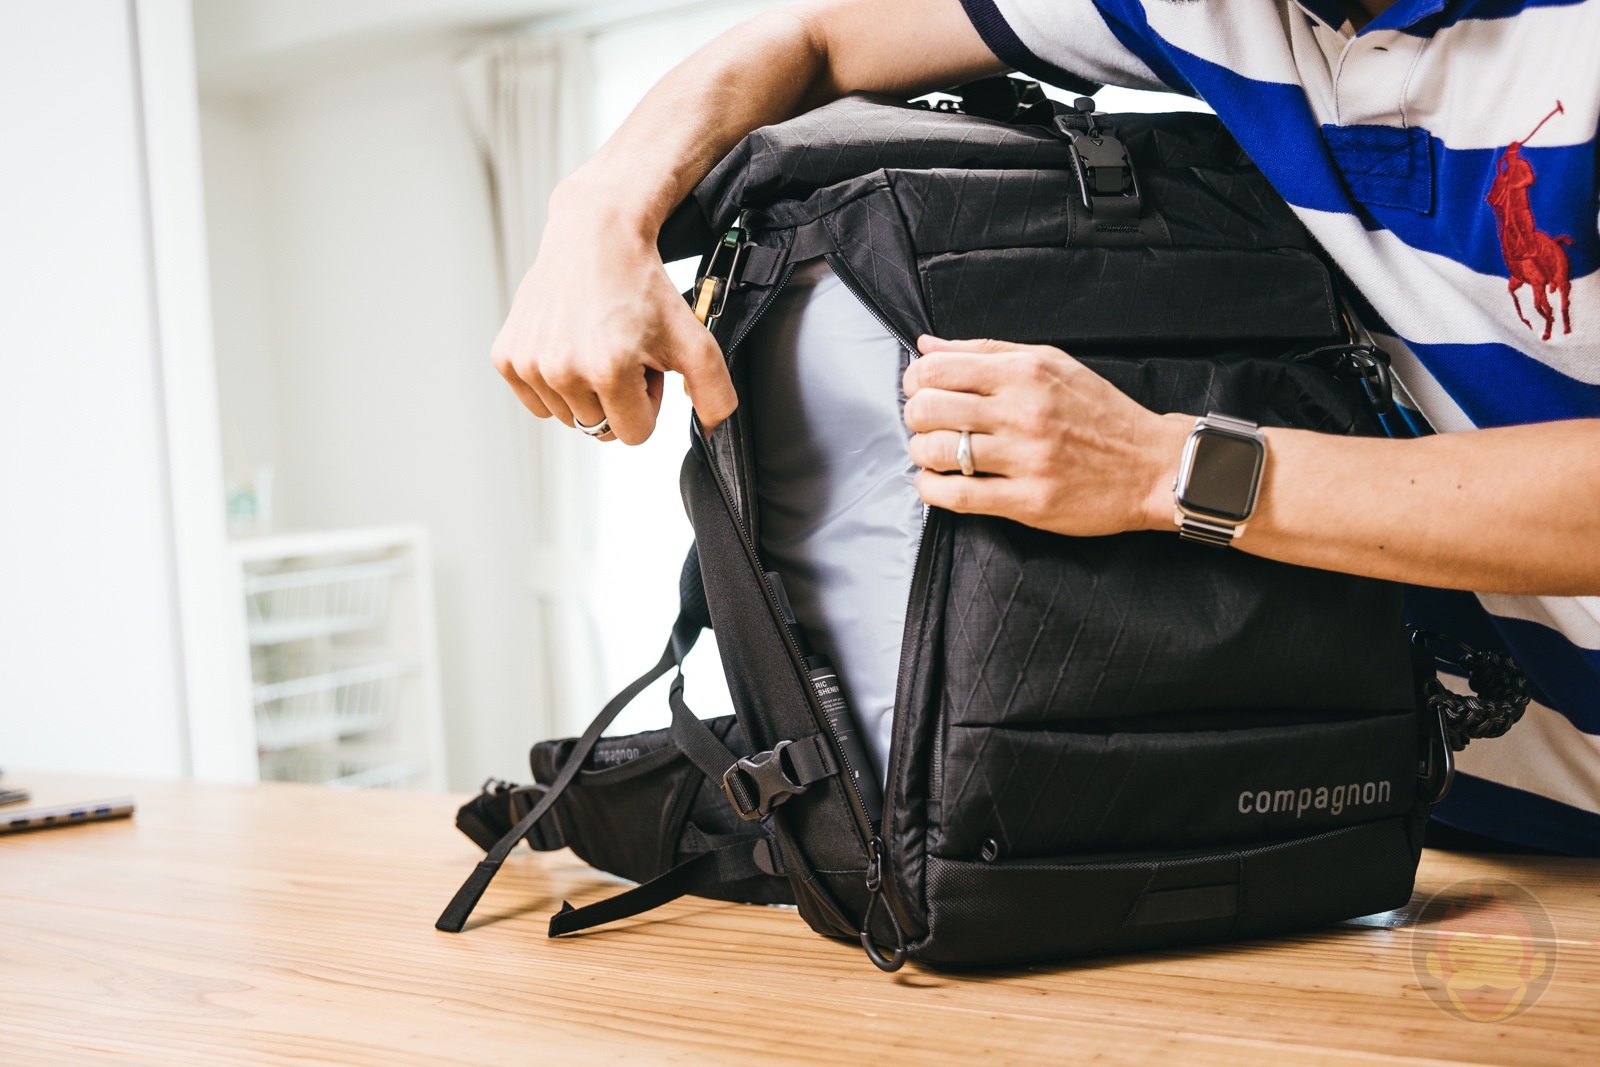 Compagnon element bacpack review 08